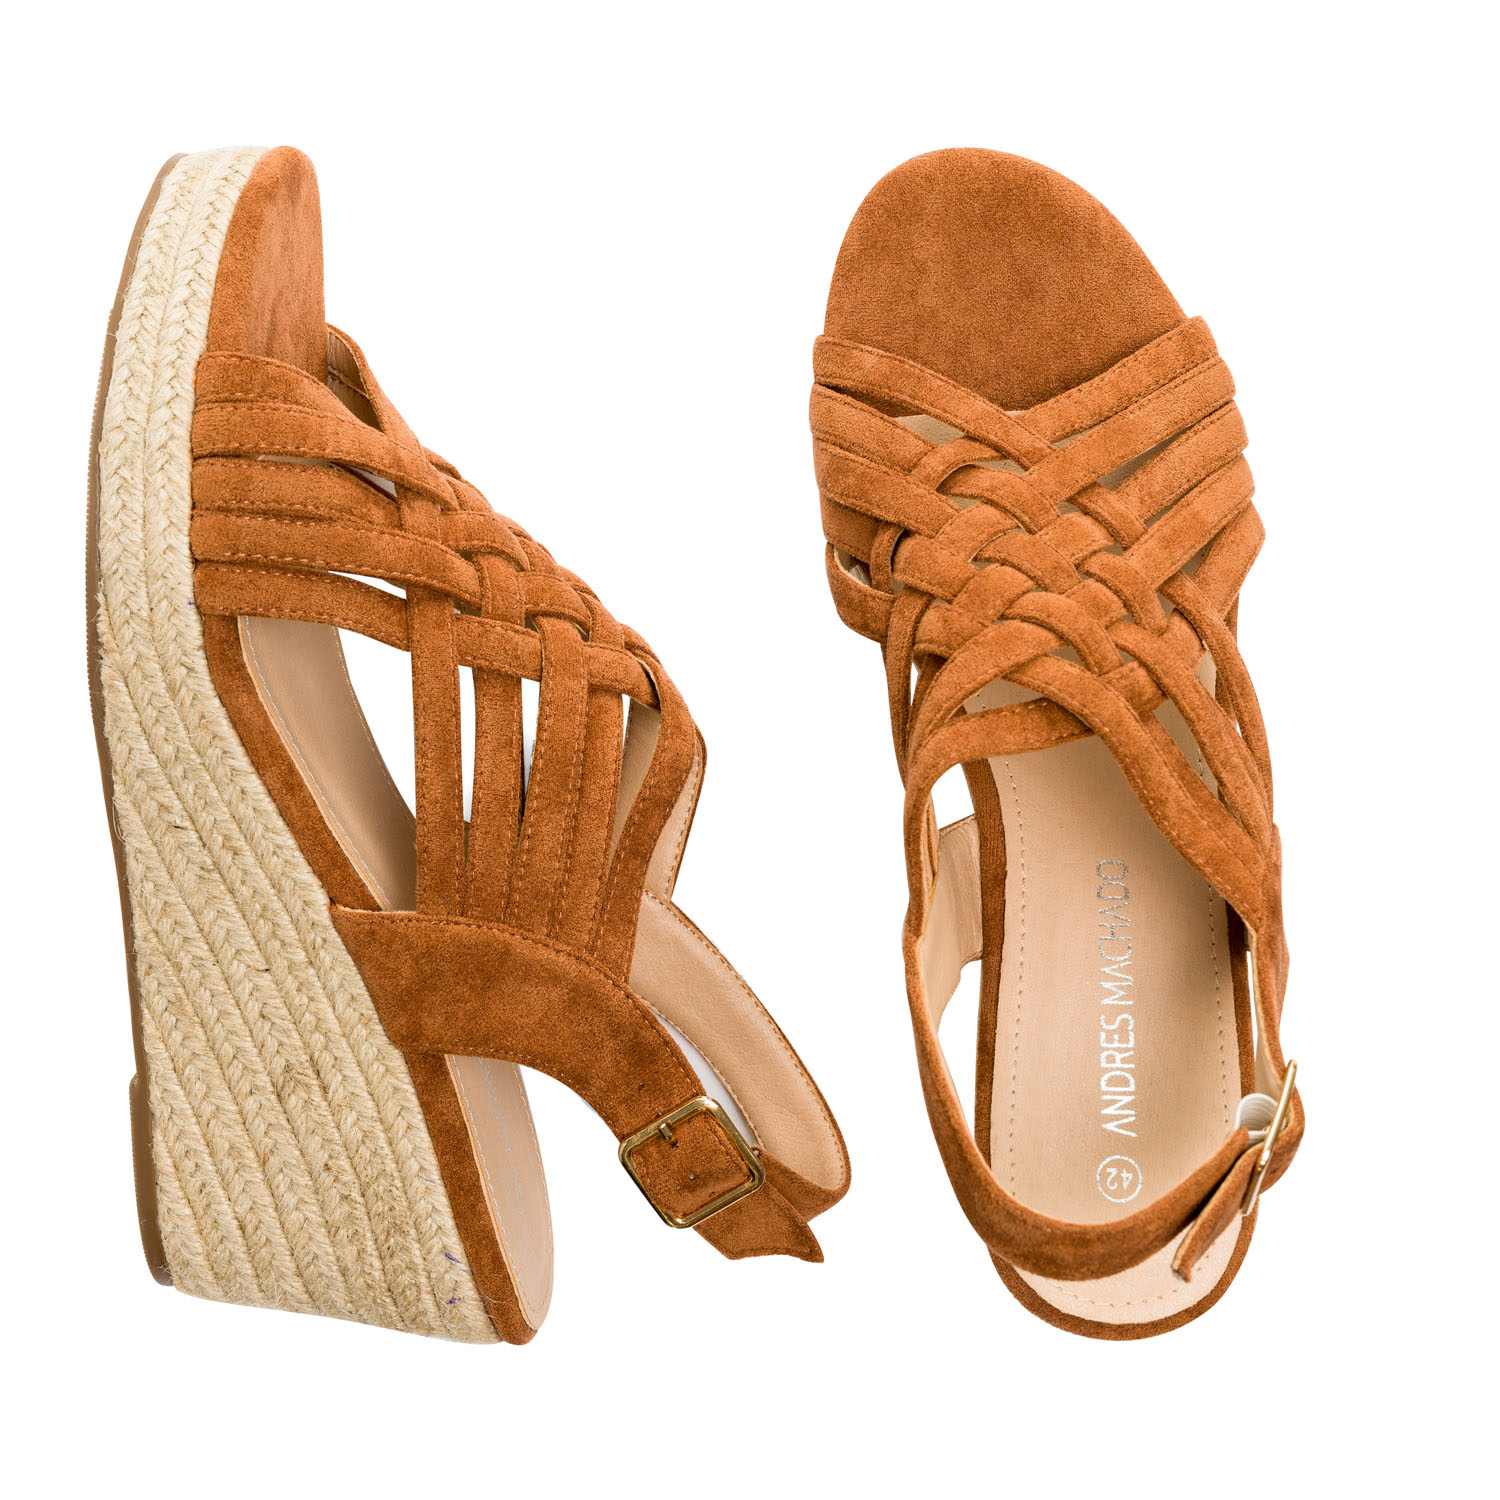 Brown faux suede espadrilles with jute wedge 